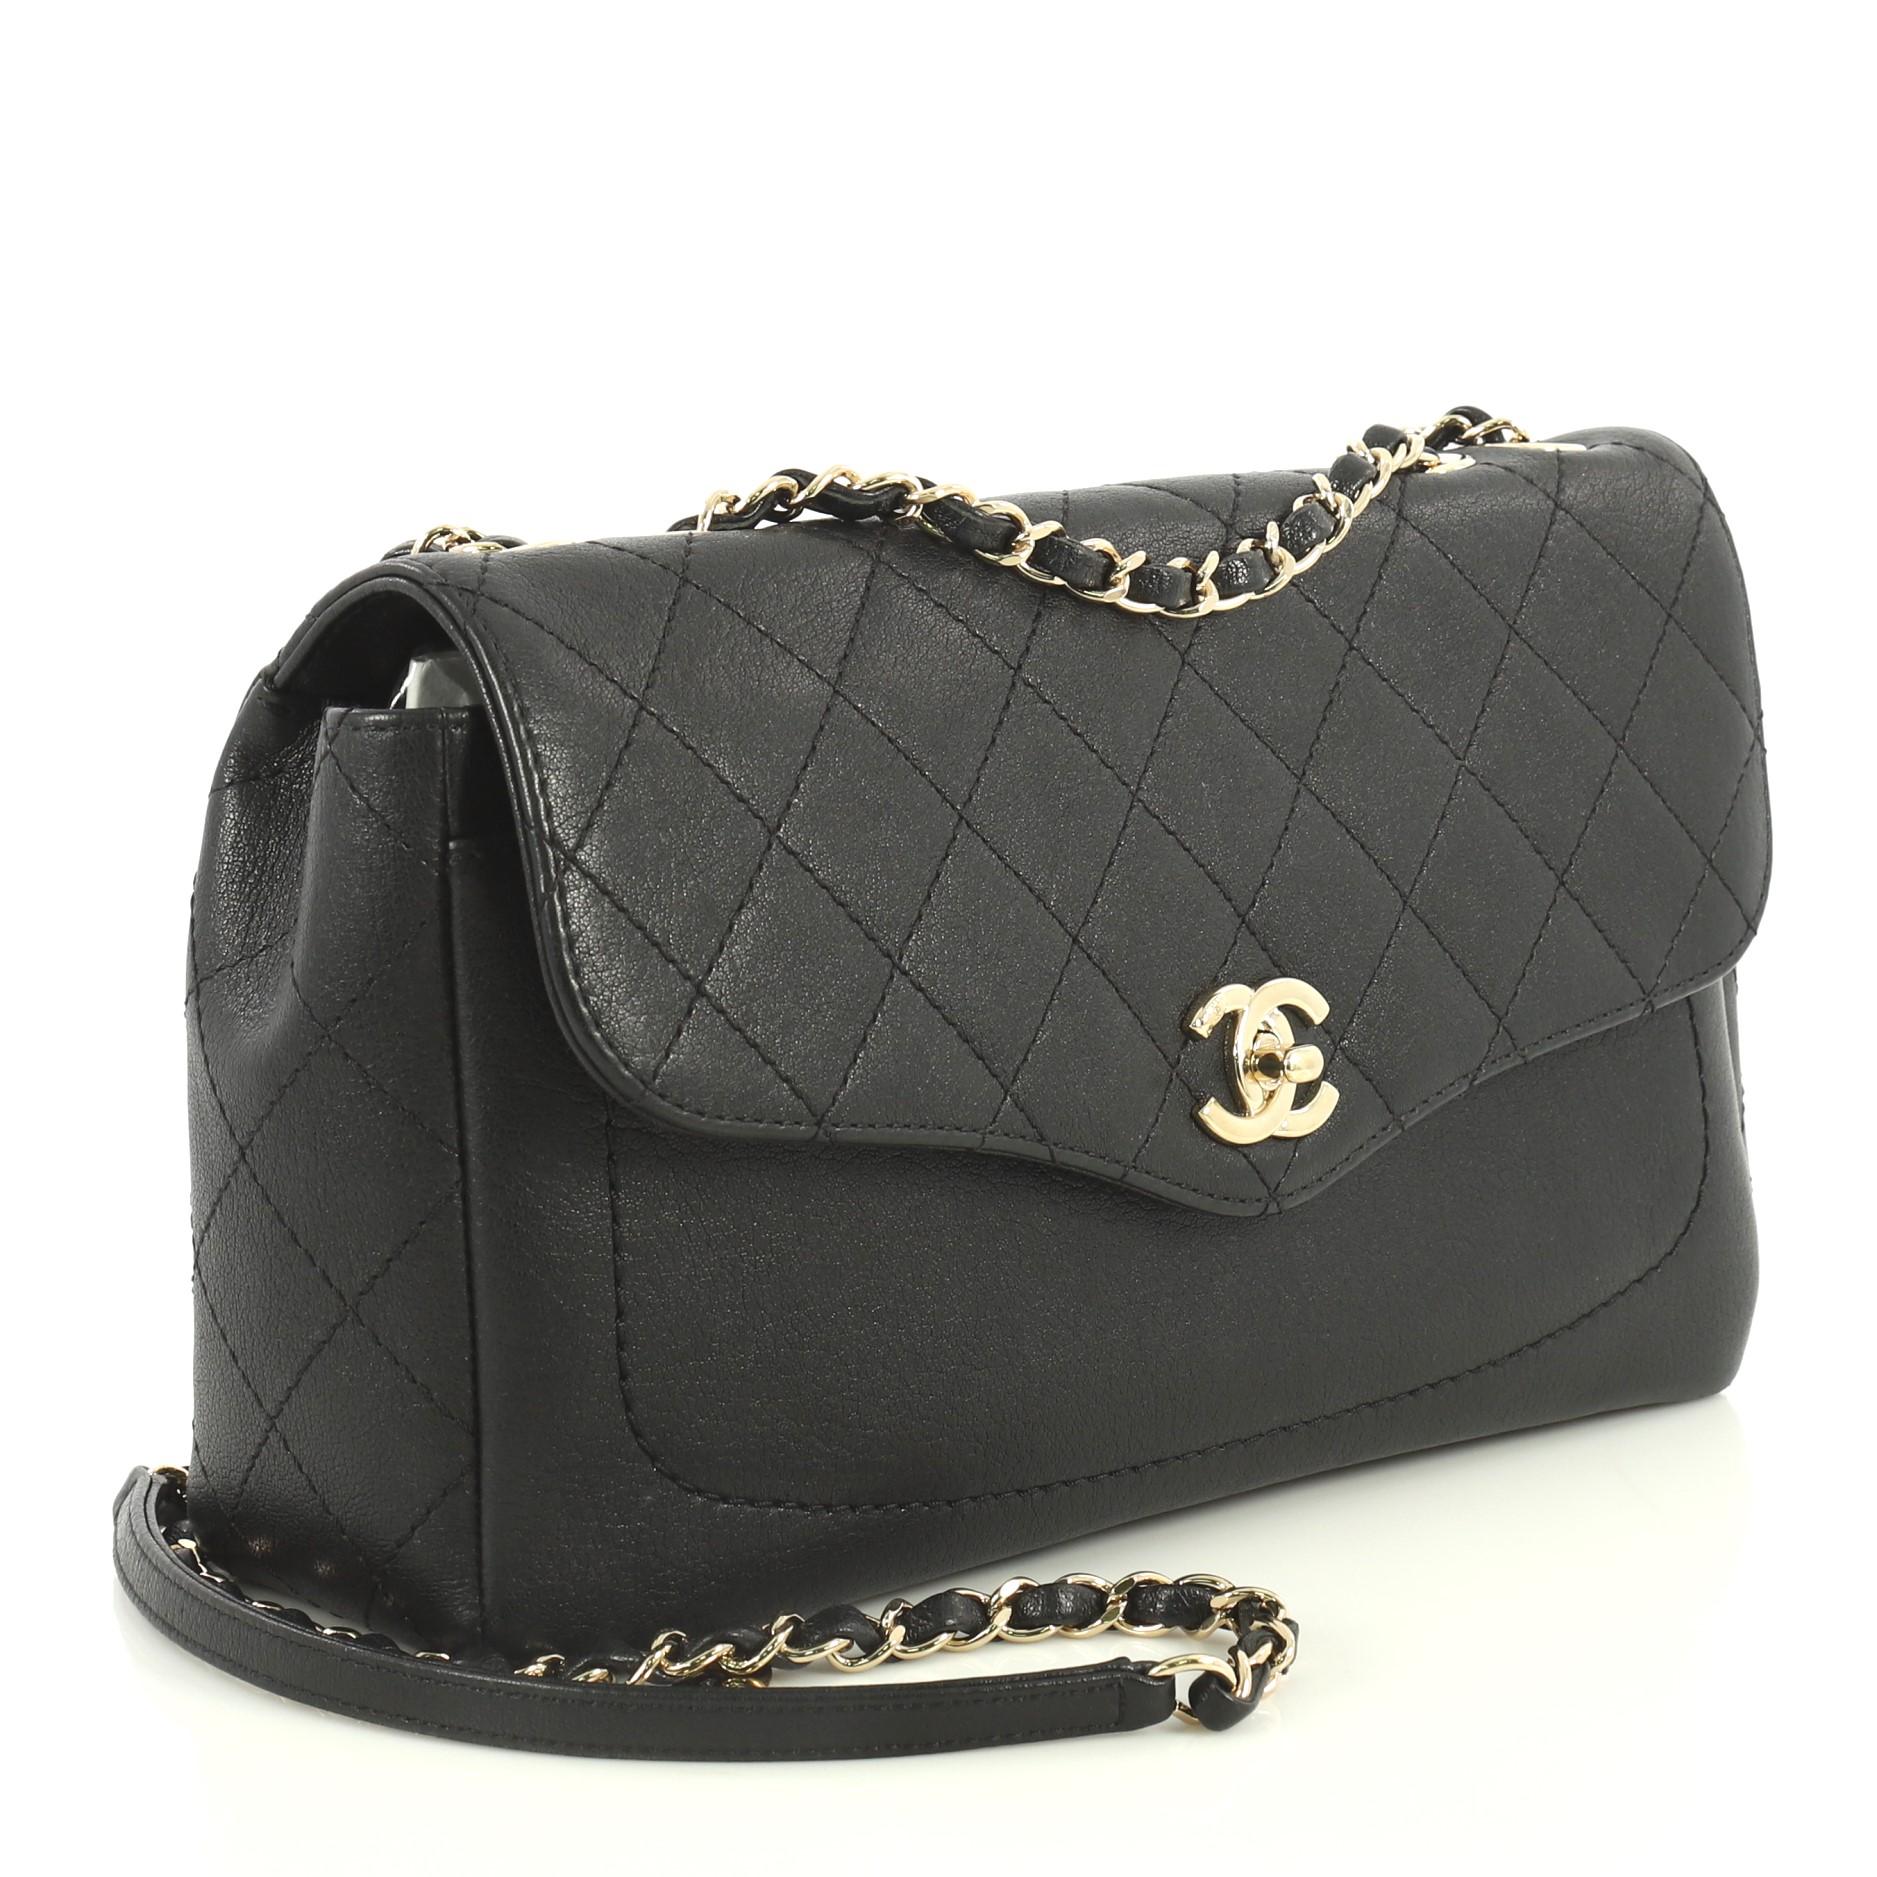 Black Chanel Coco Curve Flap Messenger Quilted Goatskin Large